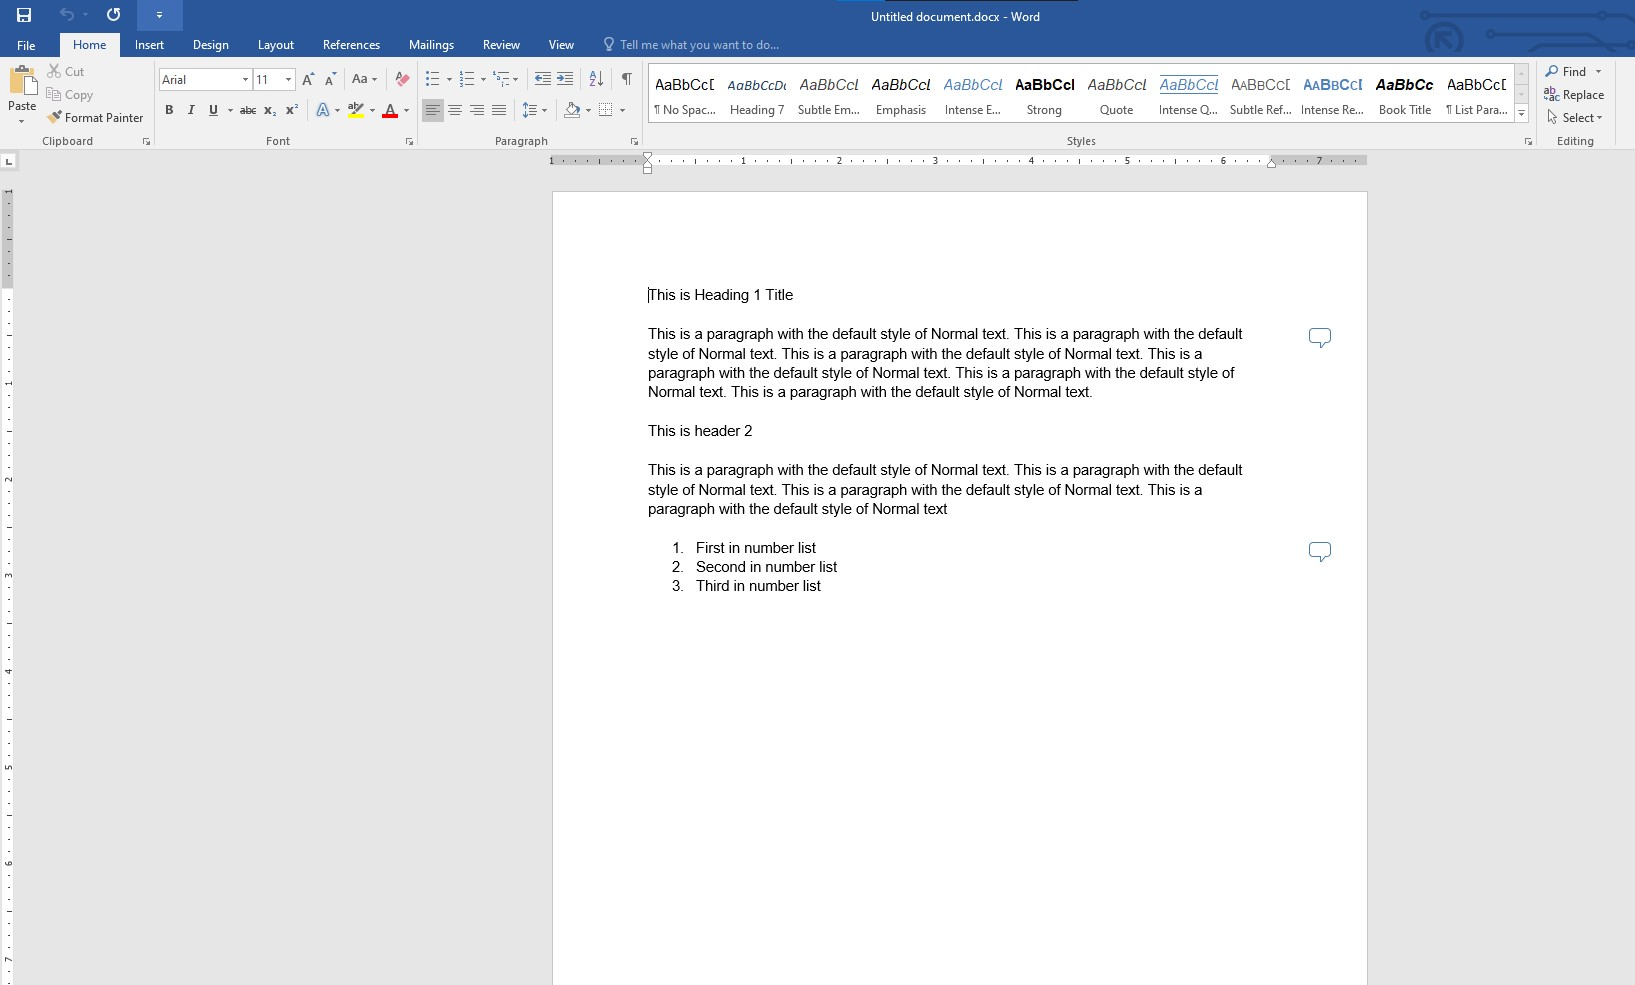 Step 4: Open the file using Microsoft Word